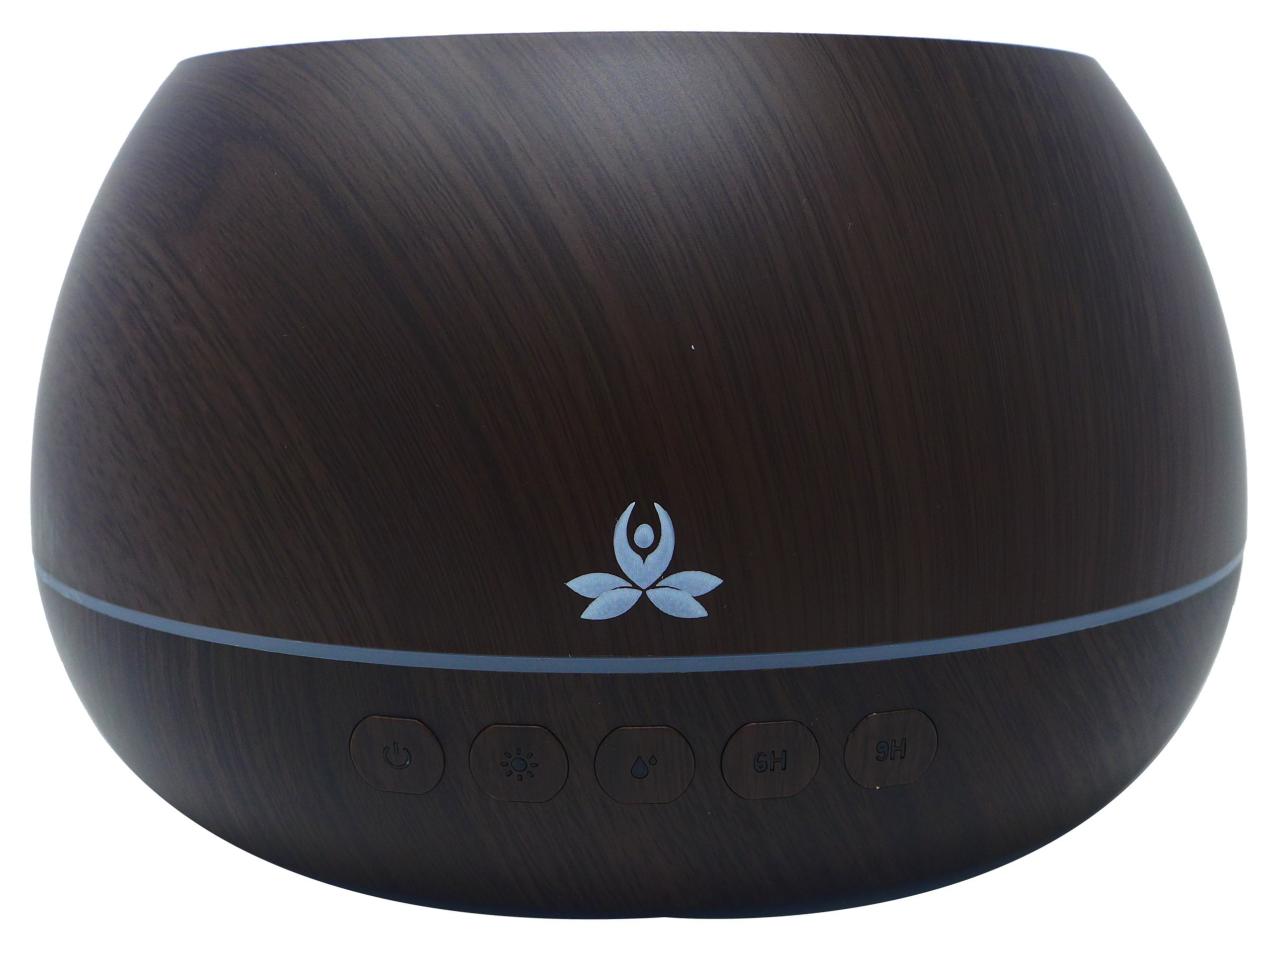 Aromatherapy diffuser for large rooms